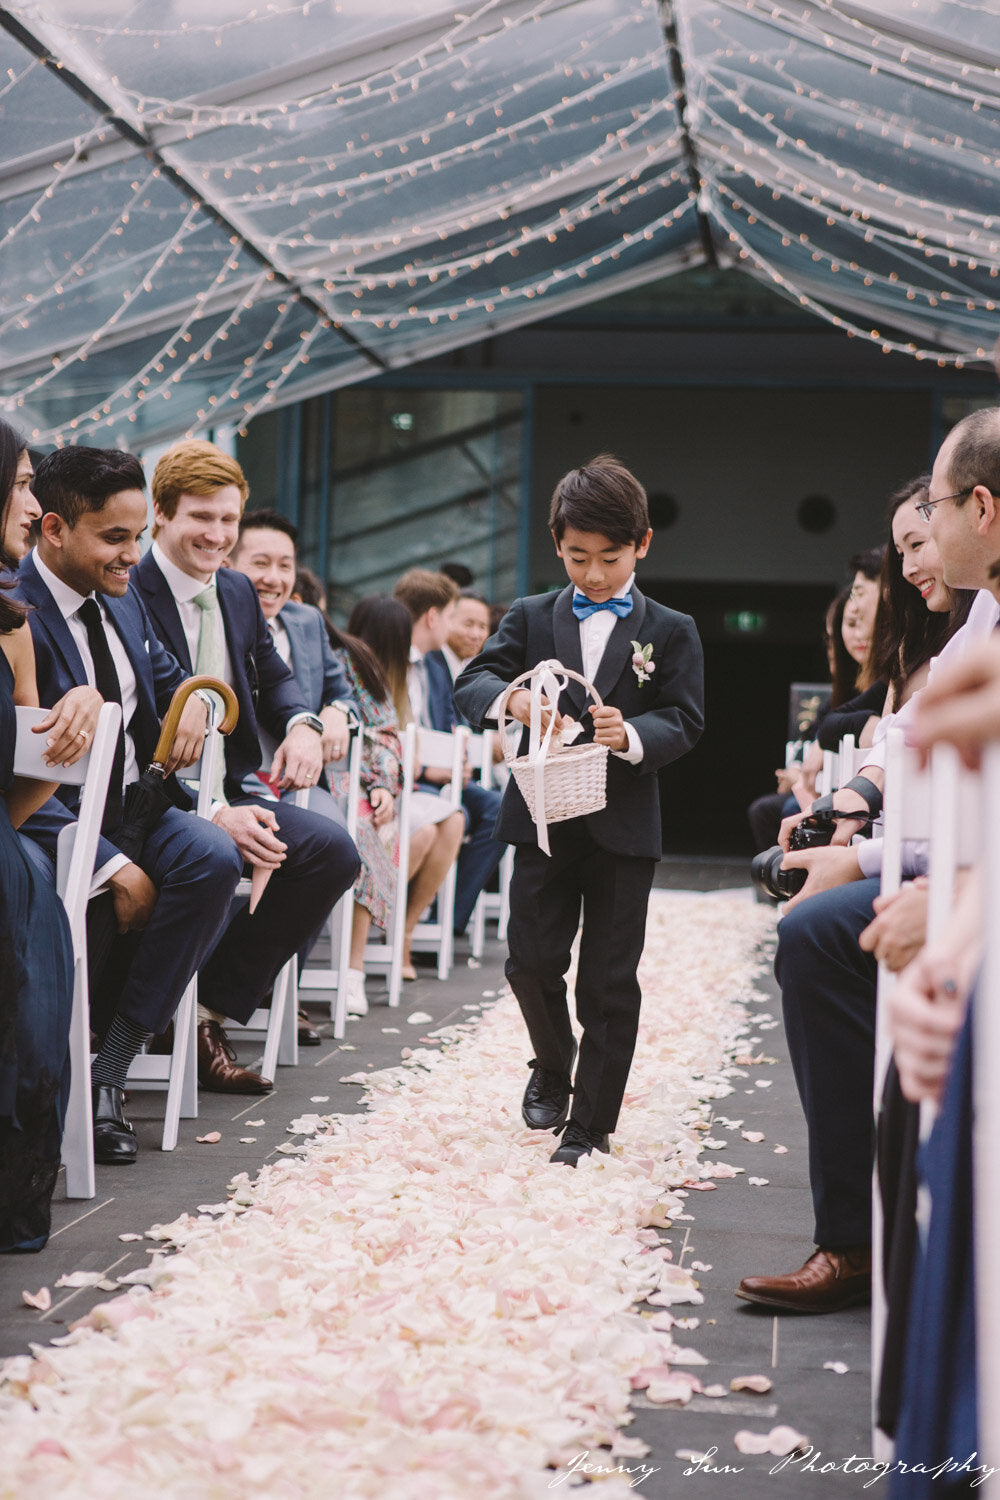 page boy walking down the aisle throwing petals